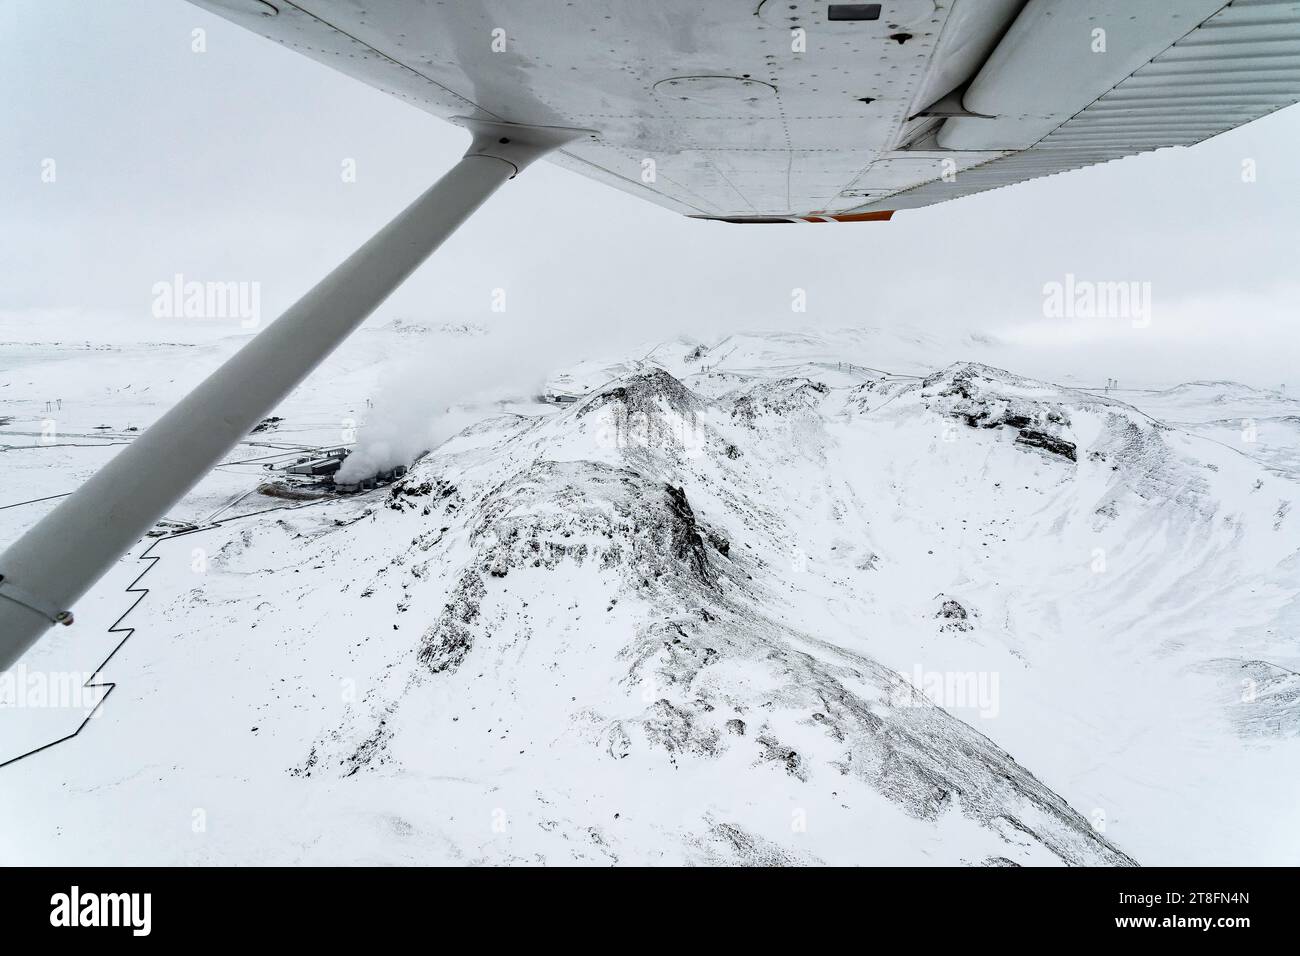 Aerial view of rugged snow-covered mountains stretching into the horizon, captured from the underbelly of a small aircraft Stock Photo